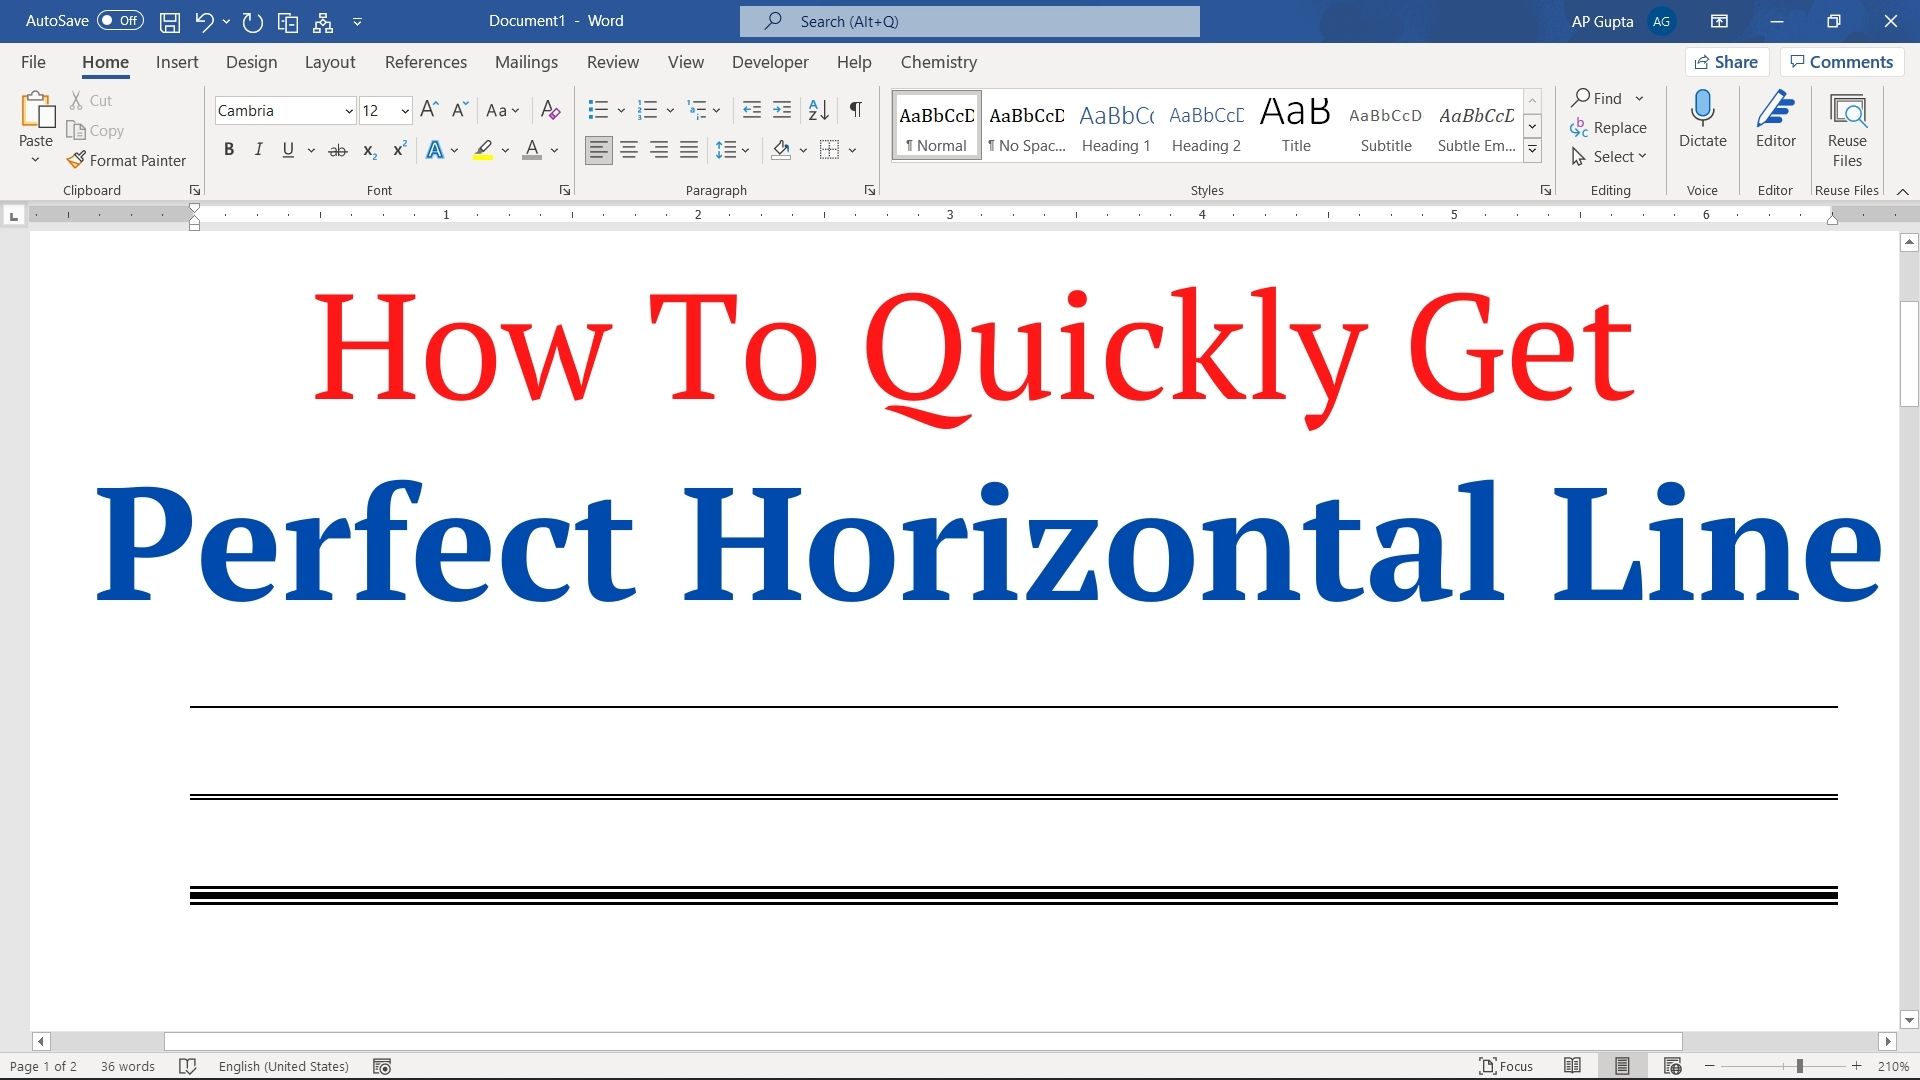 How to quickly get perfectly horizontal line in Word